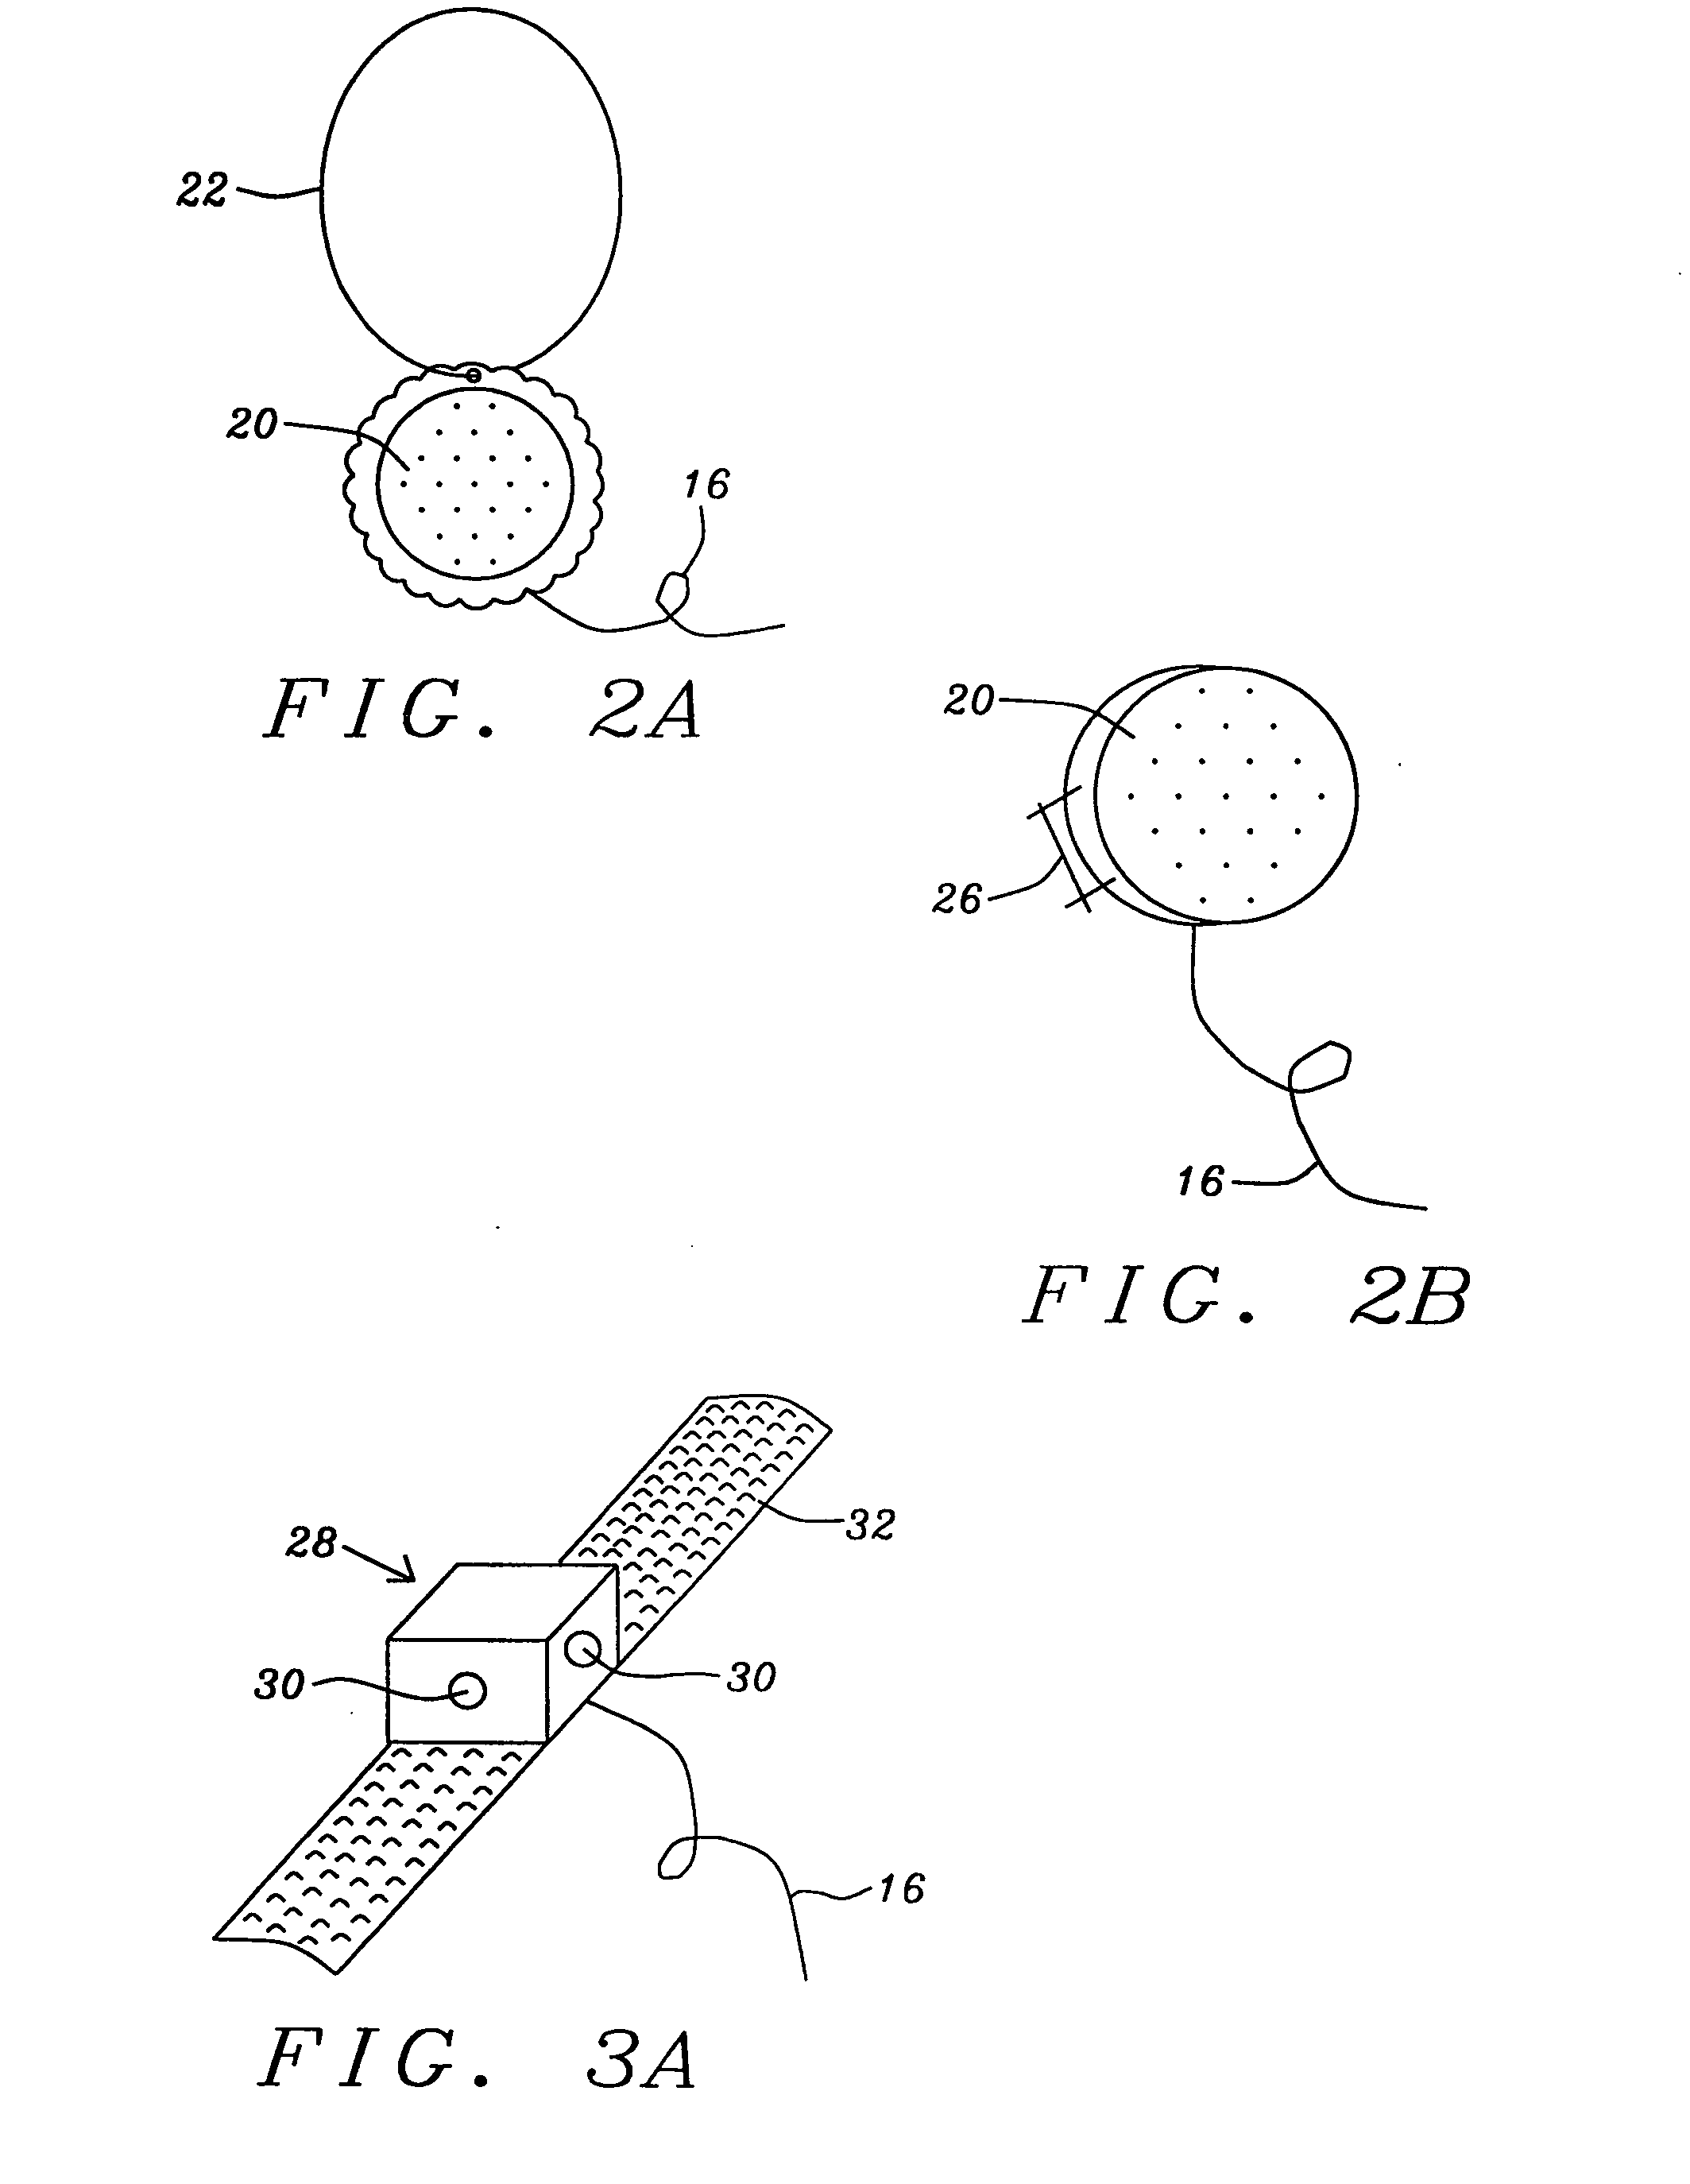 System and method for the emergency voice and image e-mail transmitter device